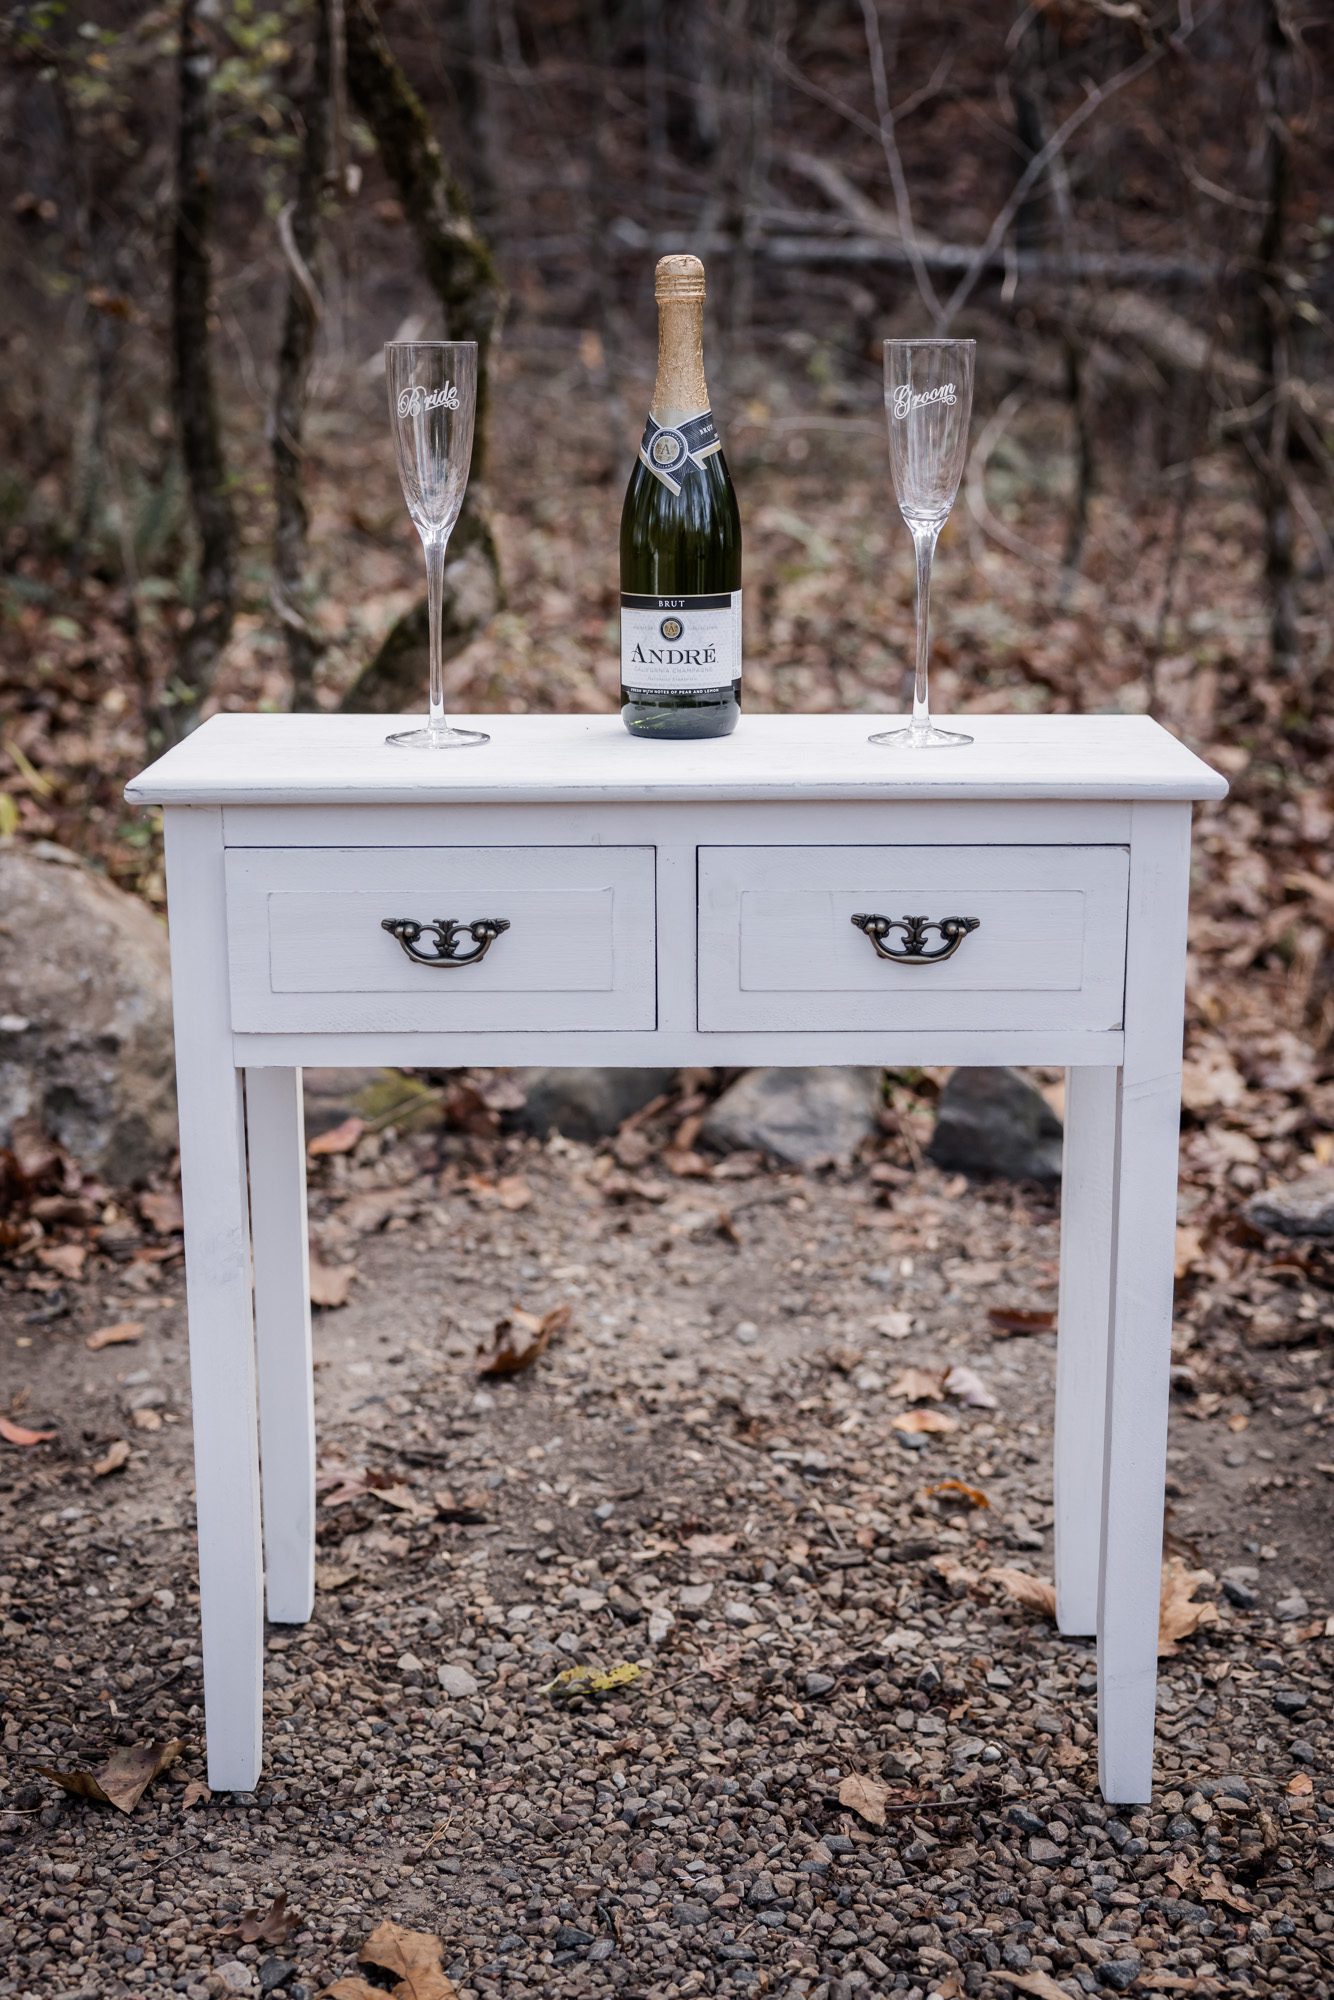 Champagne table